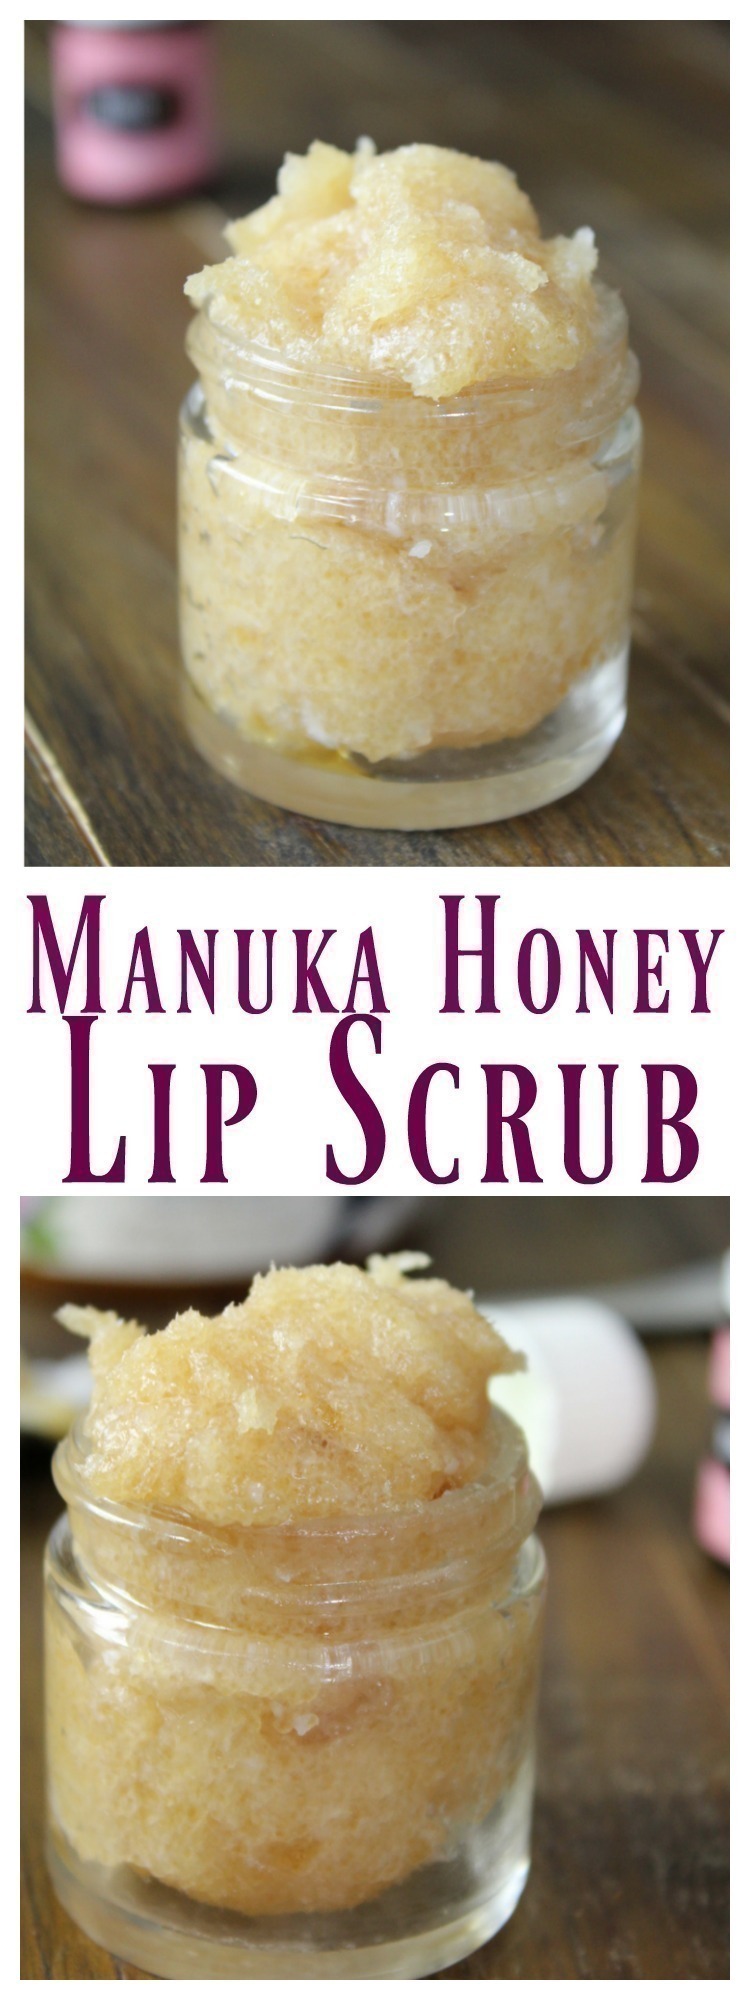 This really easy Manuka Honey Lip Scrub is great for any season - when we use a scrub, we get the dead layers off of our skin in hopes to find smoother, and potentially even younger skin.